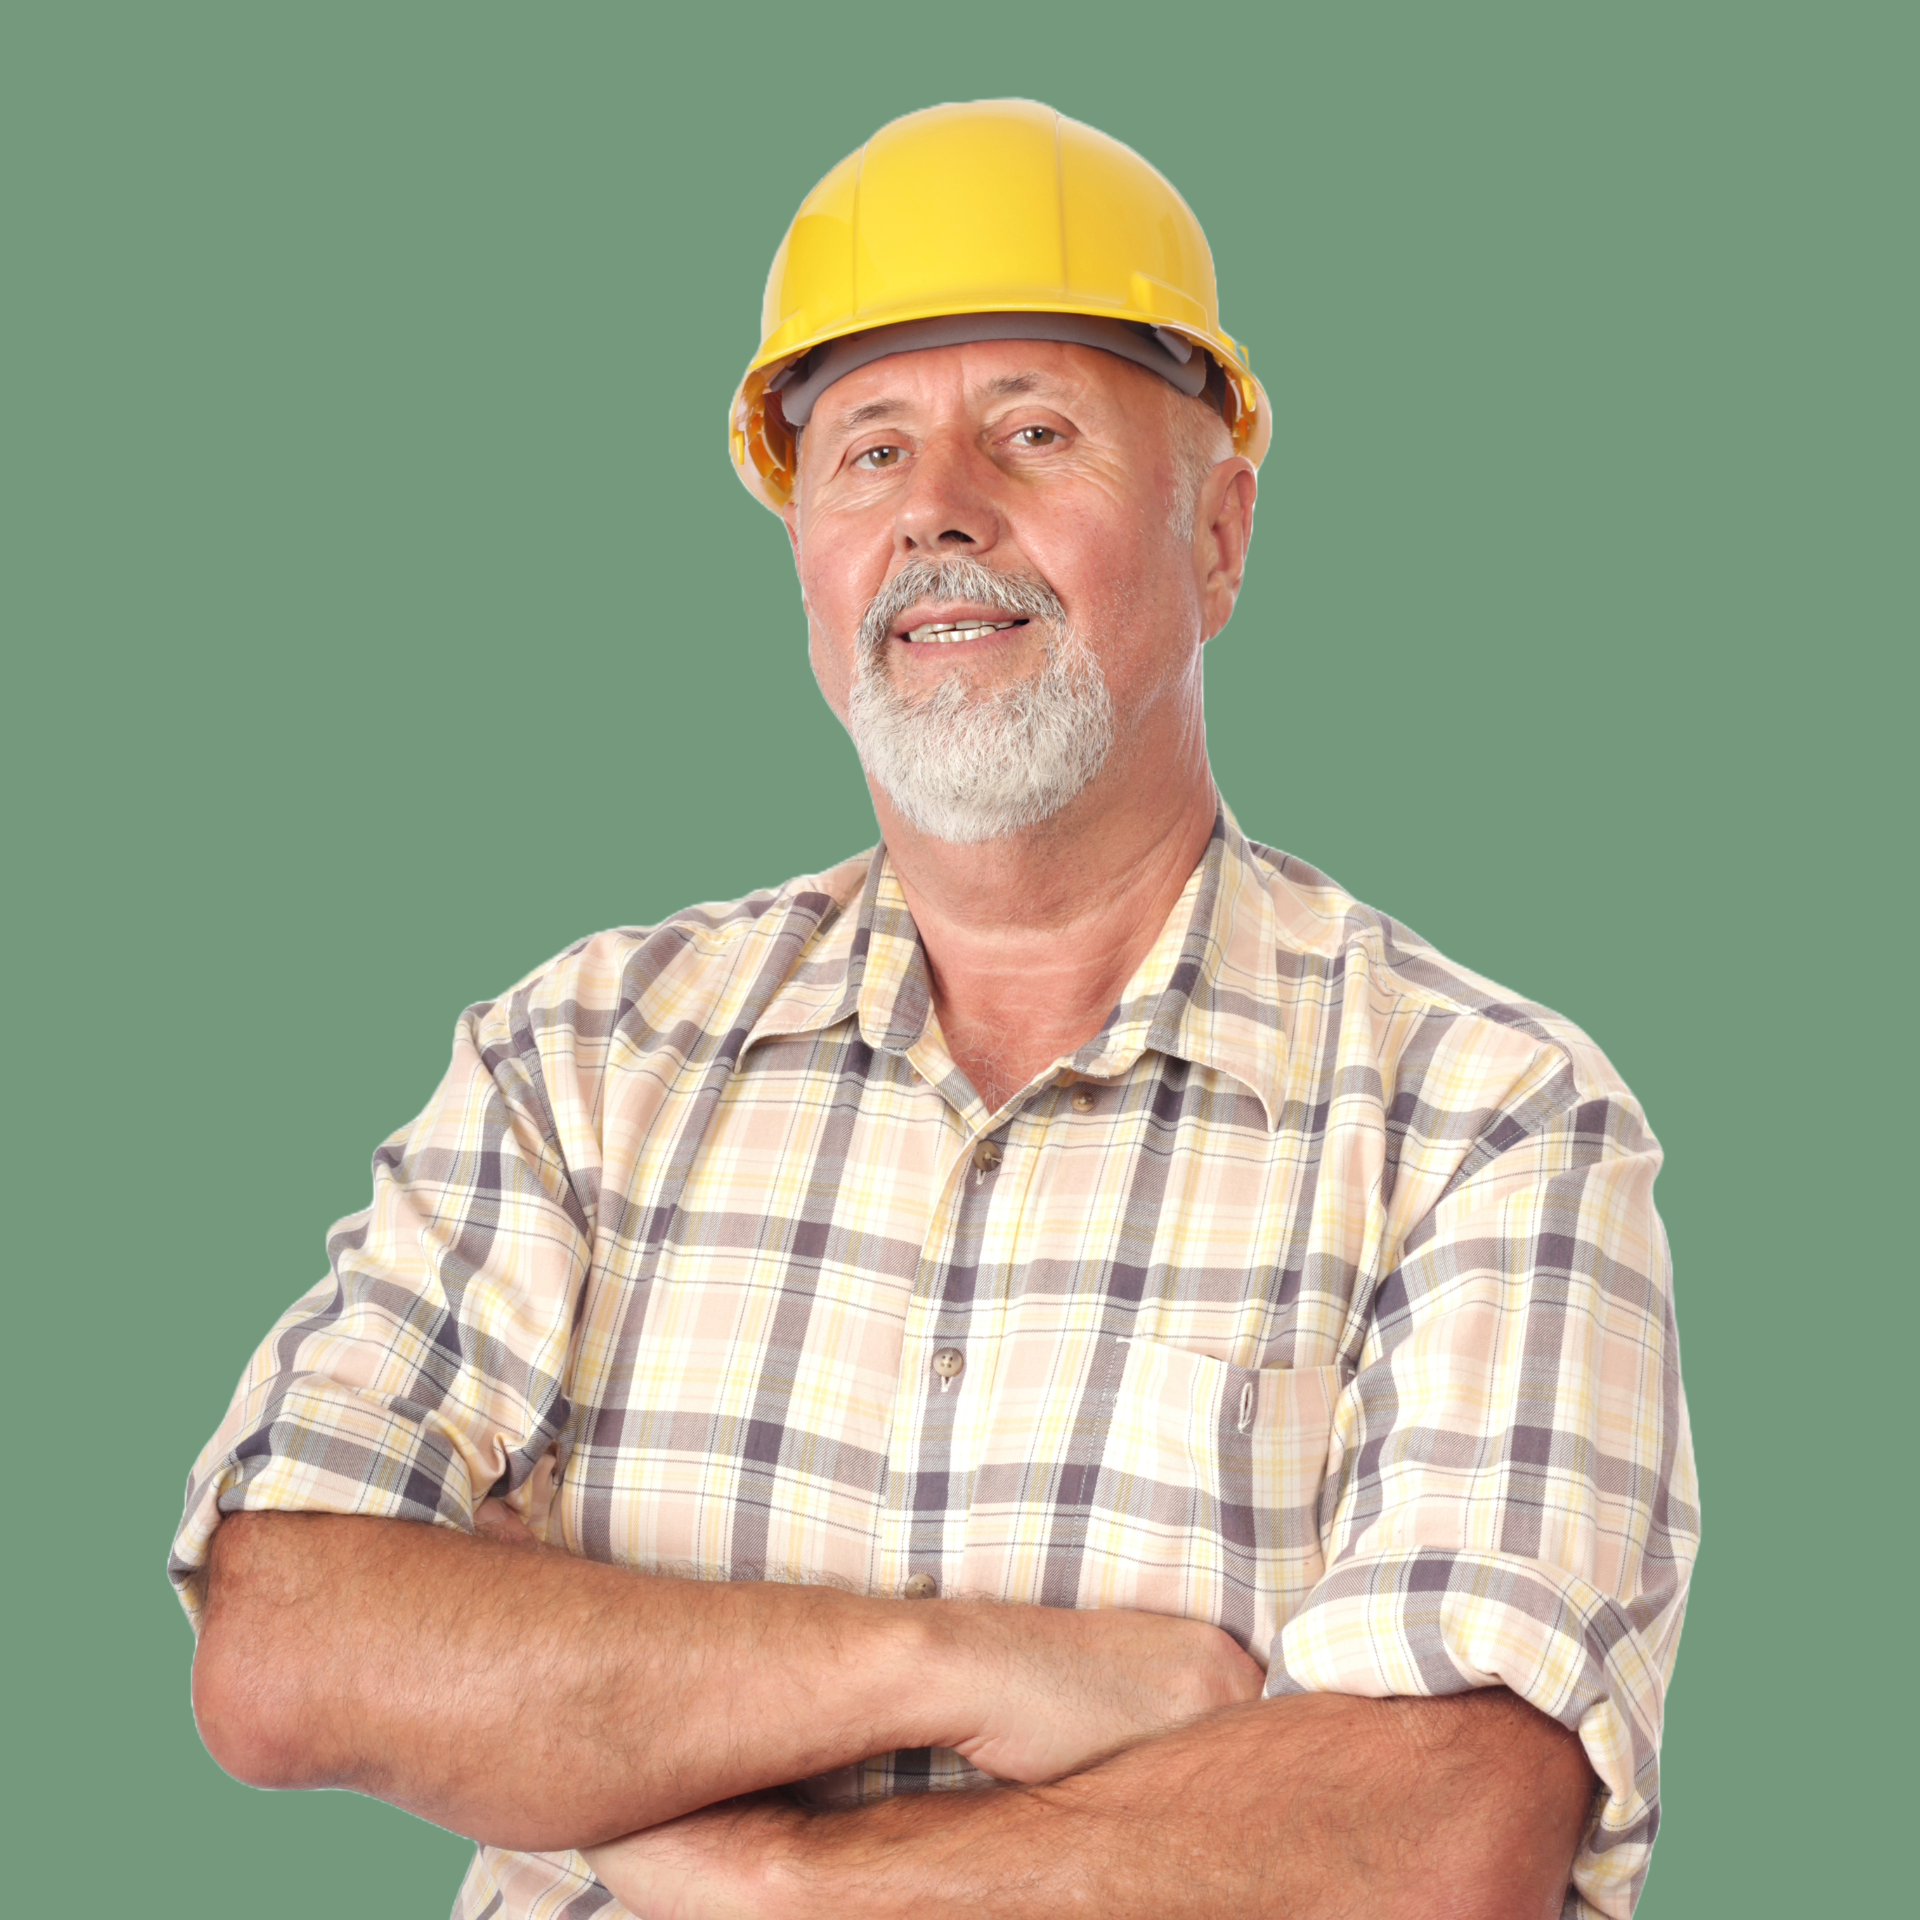 a man wearing a hard hat and plaid shirt is standing with his arms crossed 